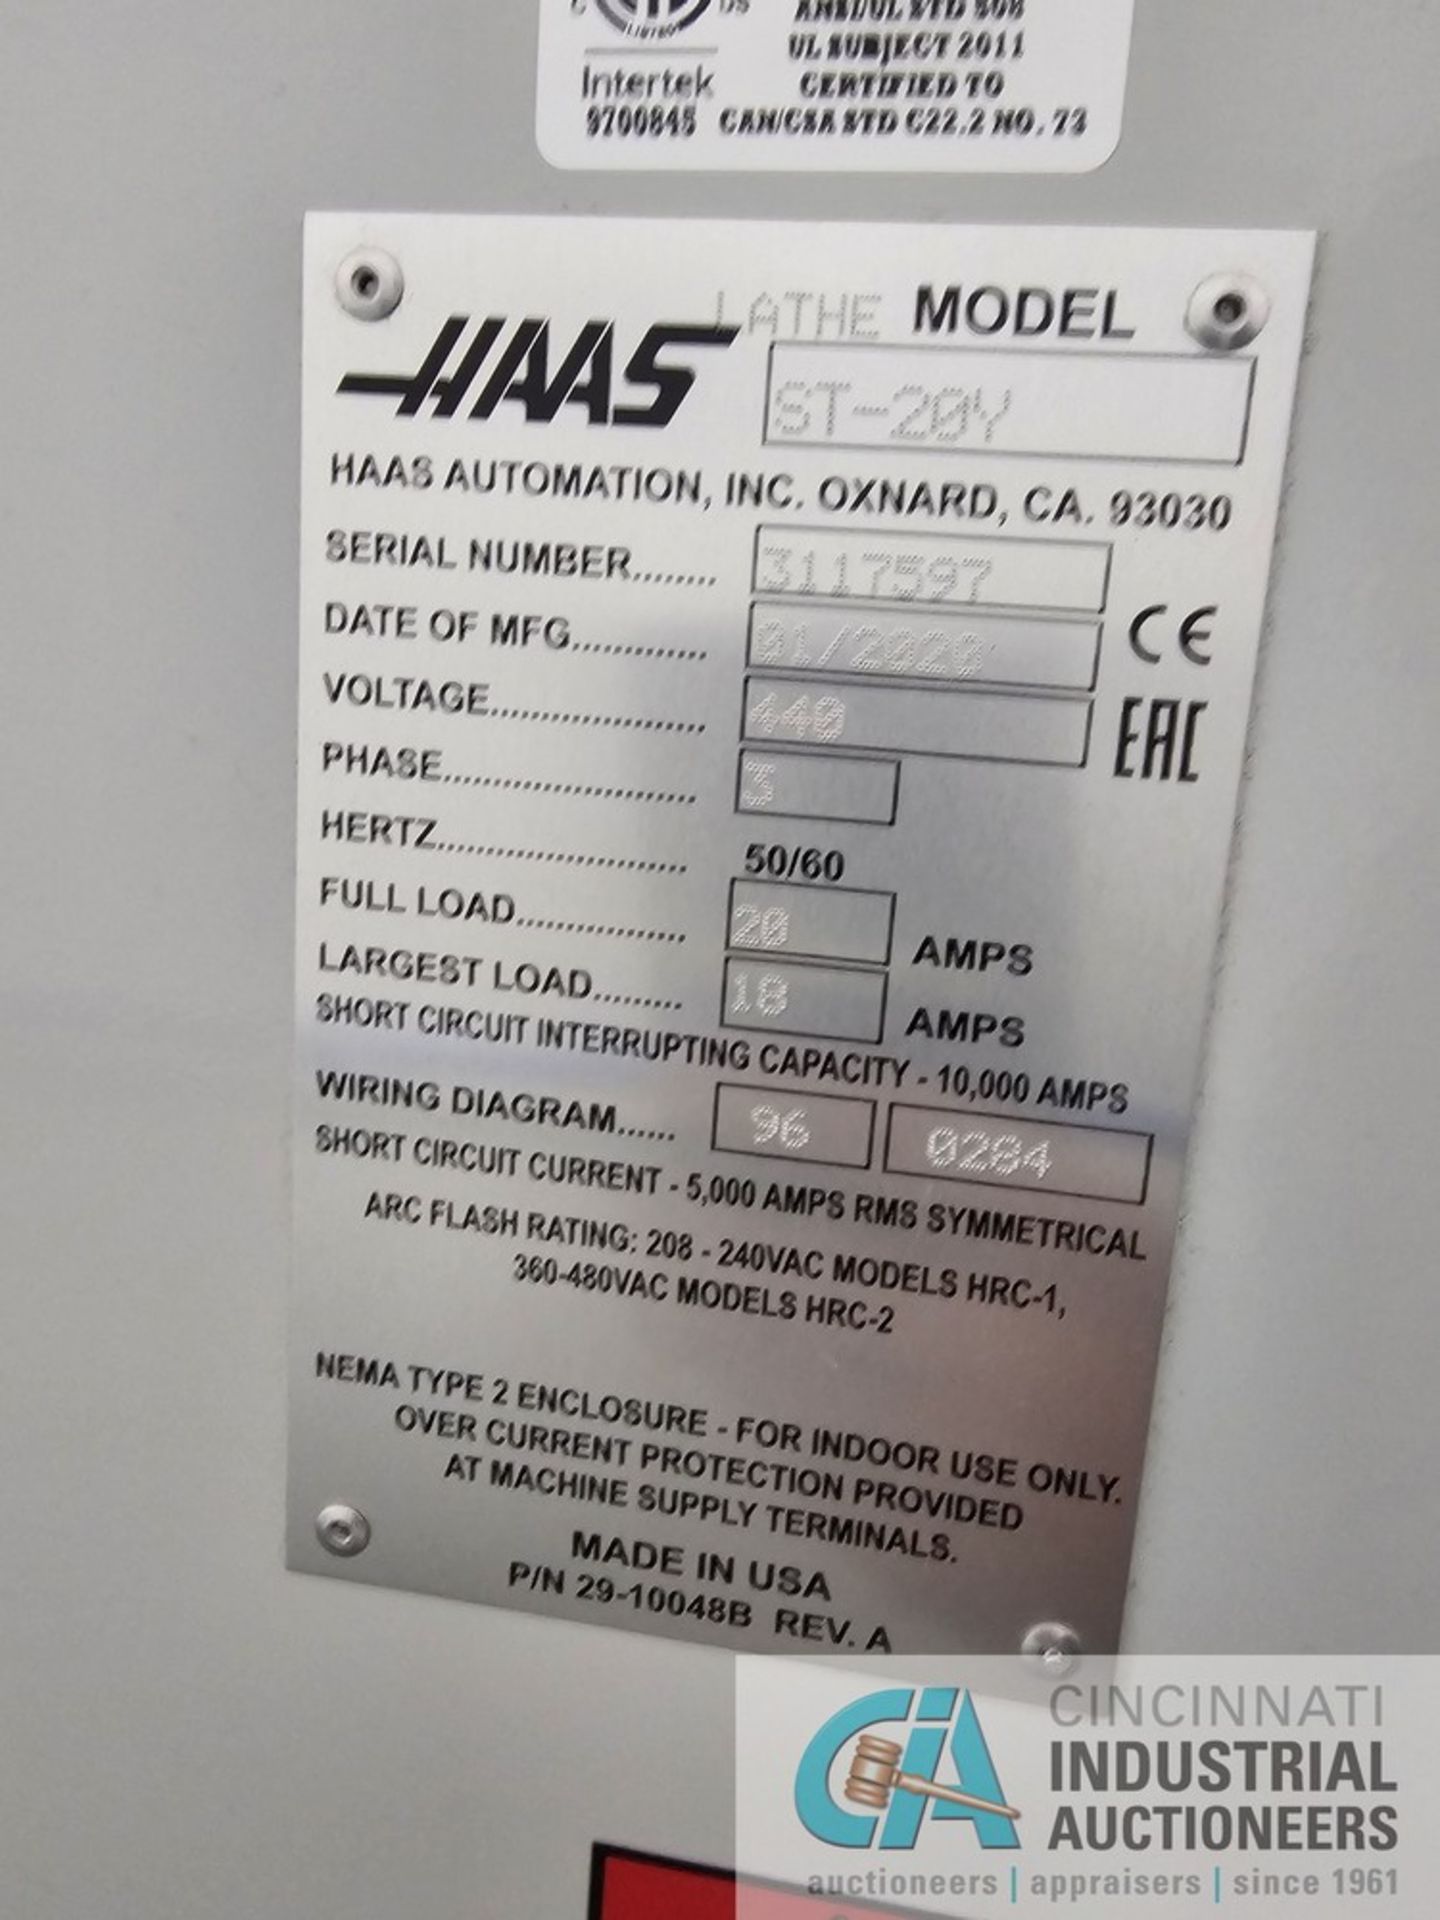 HAAS MODEL ST20Y CNC TURNING CENTER; S/N 3117597, 12-POSITION LIVE TOOLING CAPABILITY TURRET, - Image 5 of 16